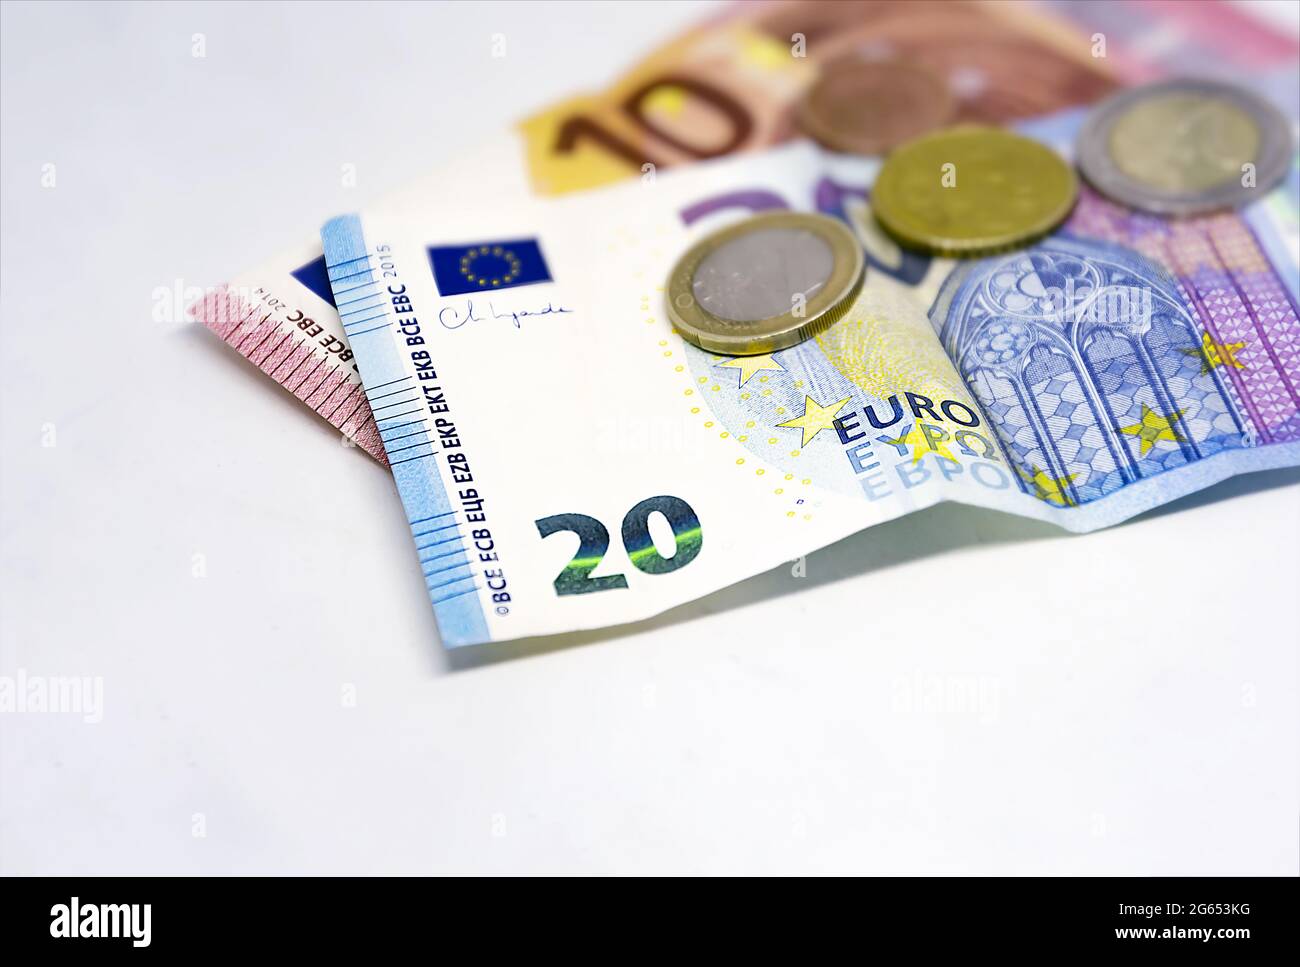 European Union coins and banknotes of different values. The euro is the European currency. Finance, economy and business. Cash and savings Stock Photo